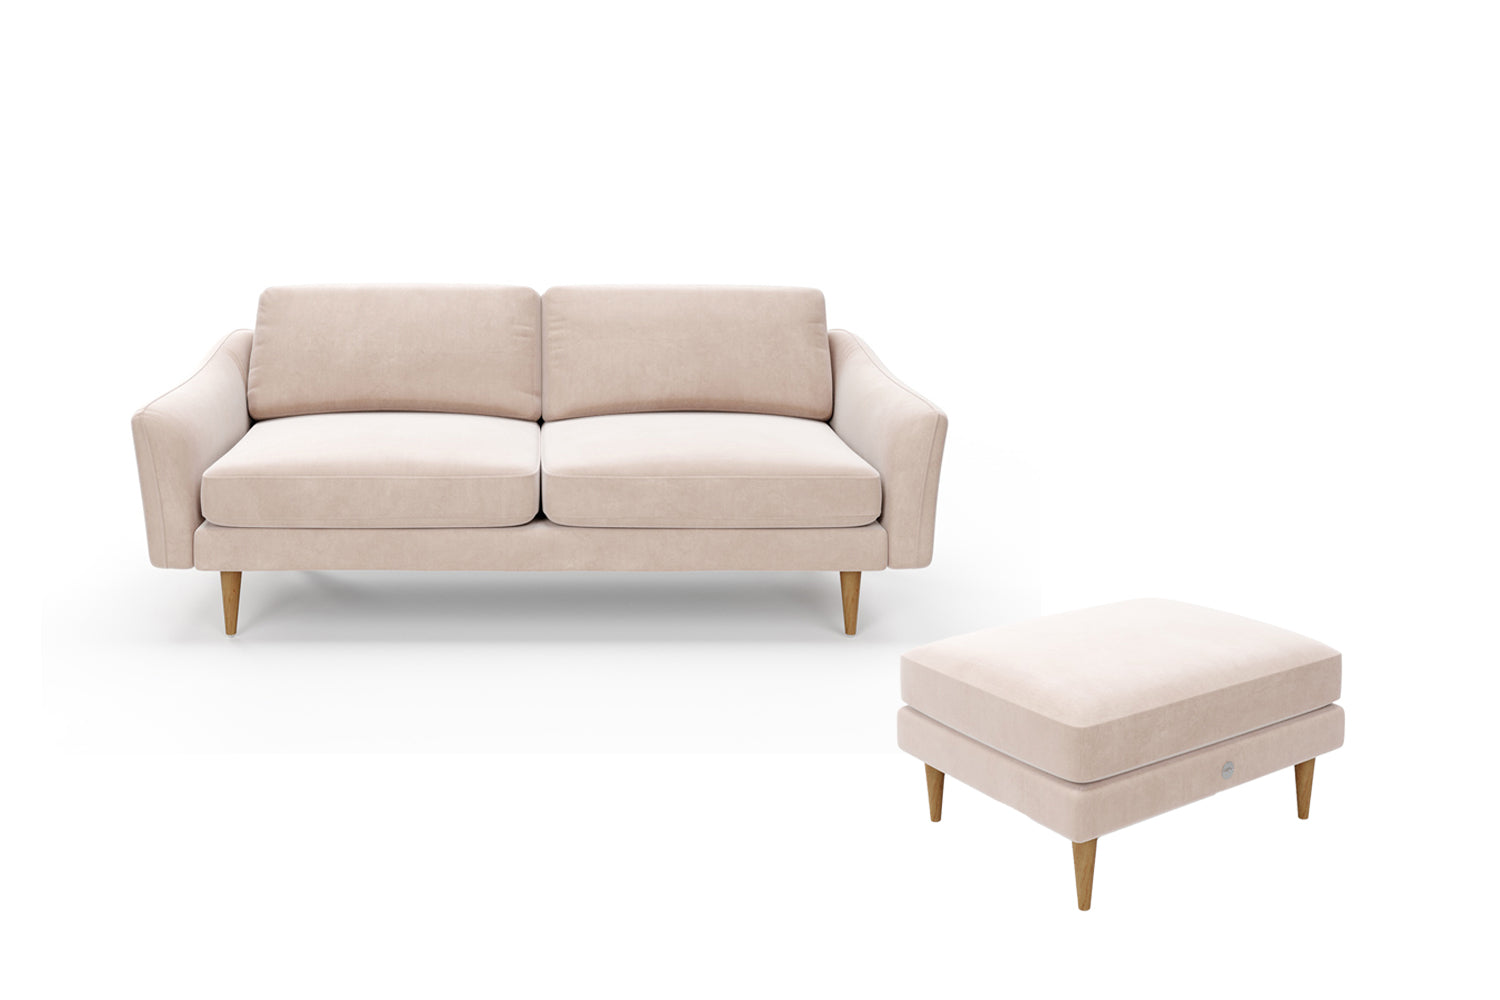 The Rebel - 3 Seater Sofa and Footstool Set - Taupe